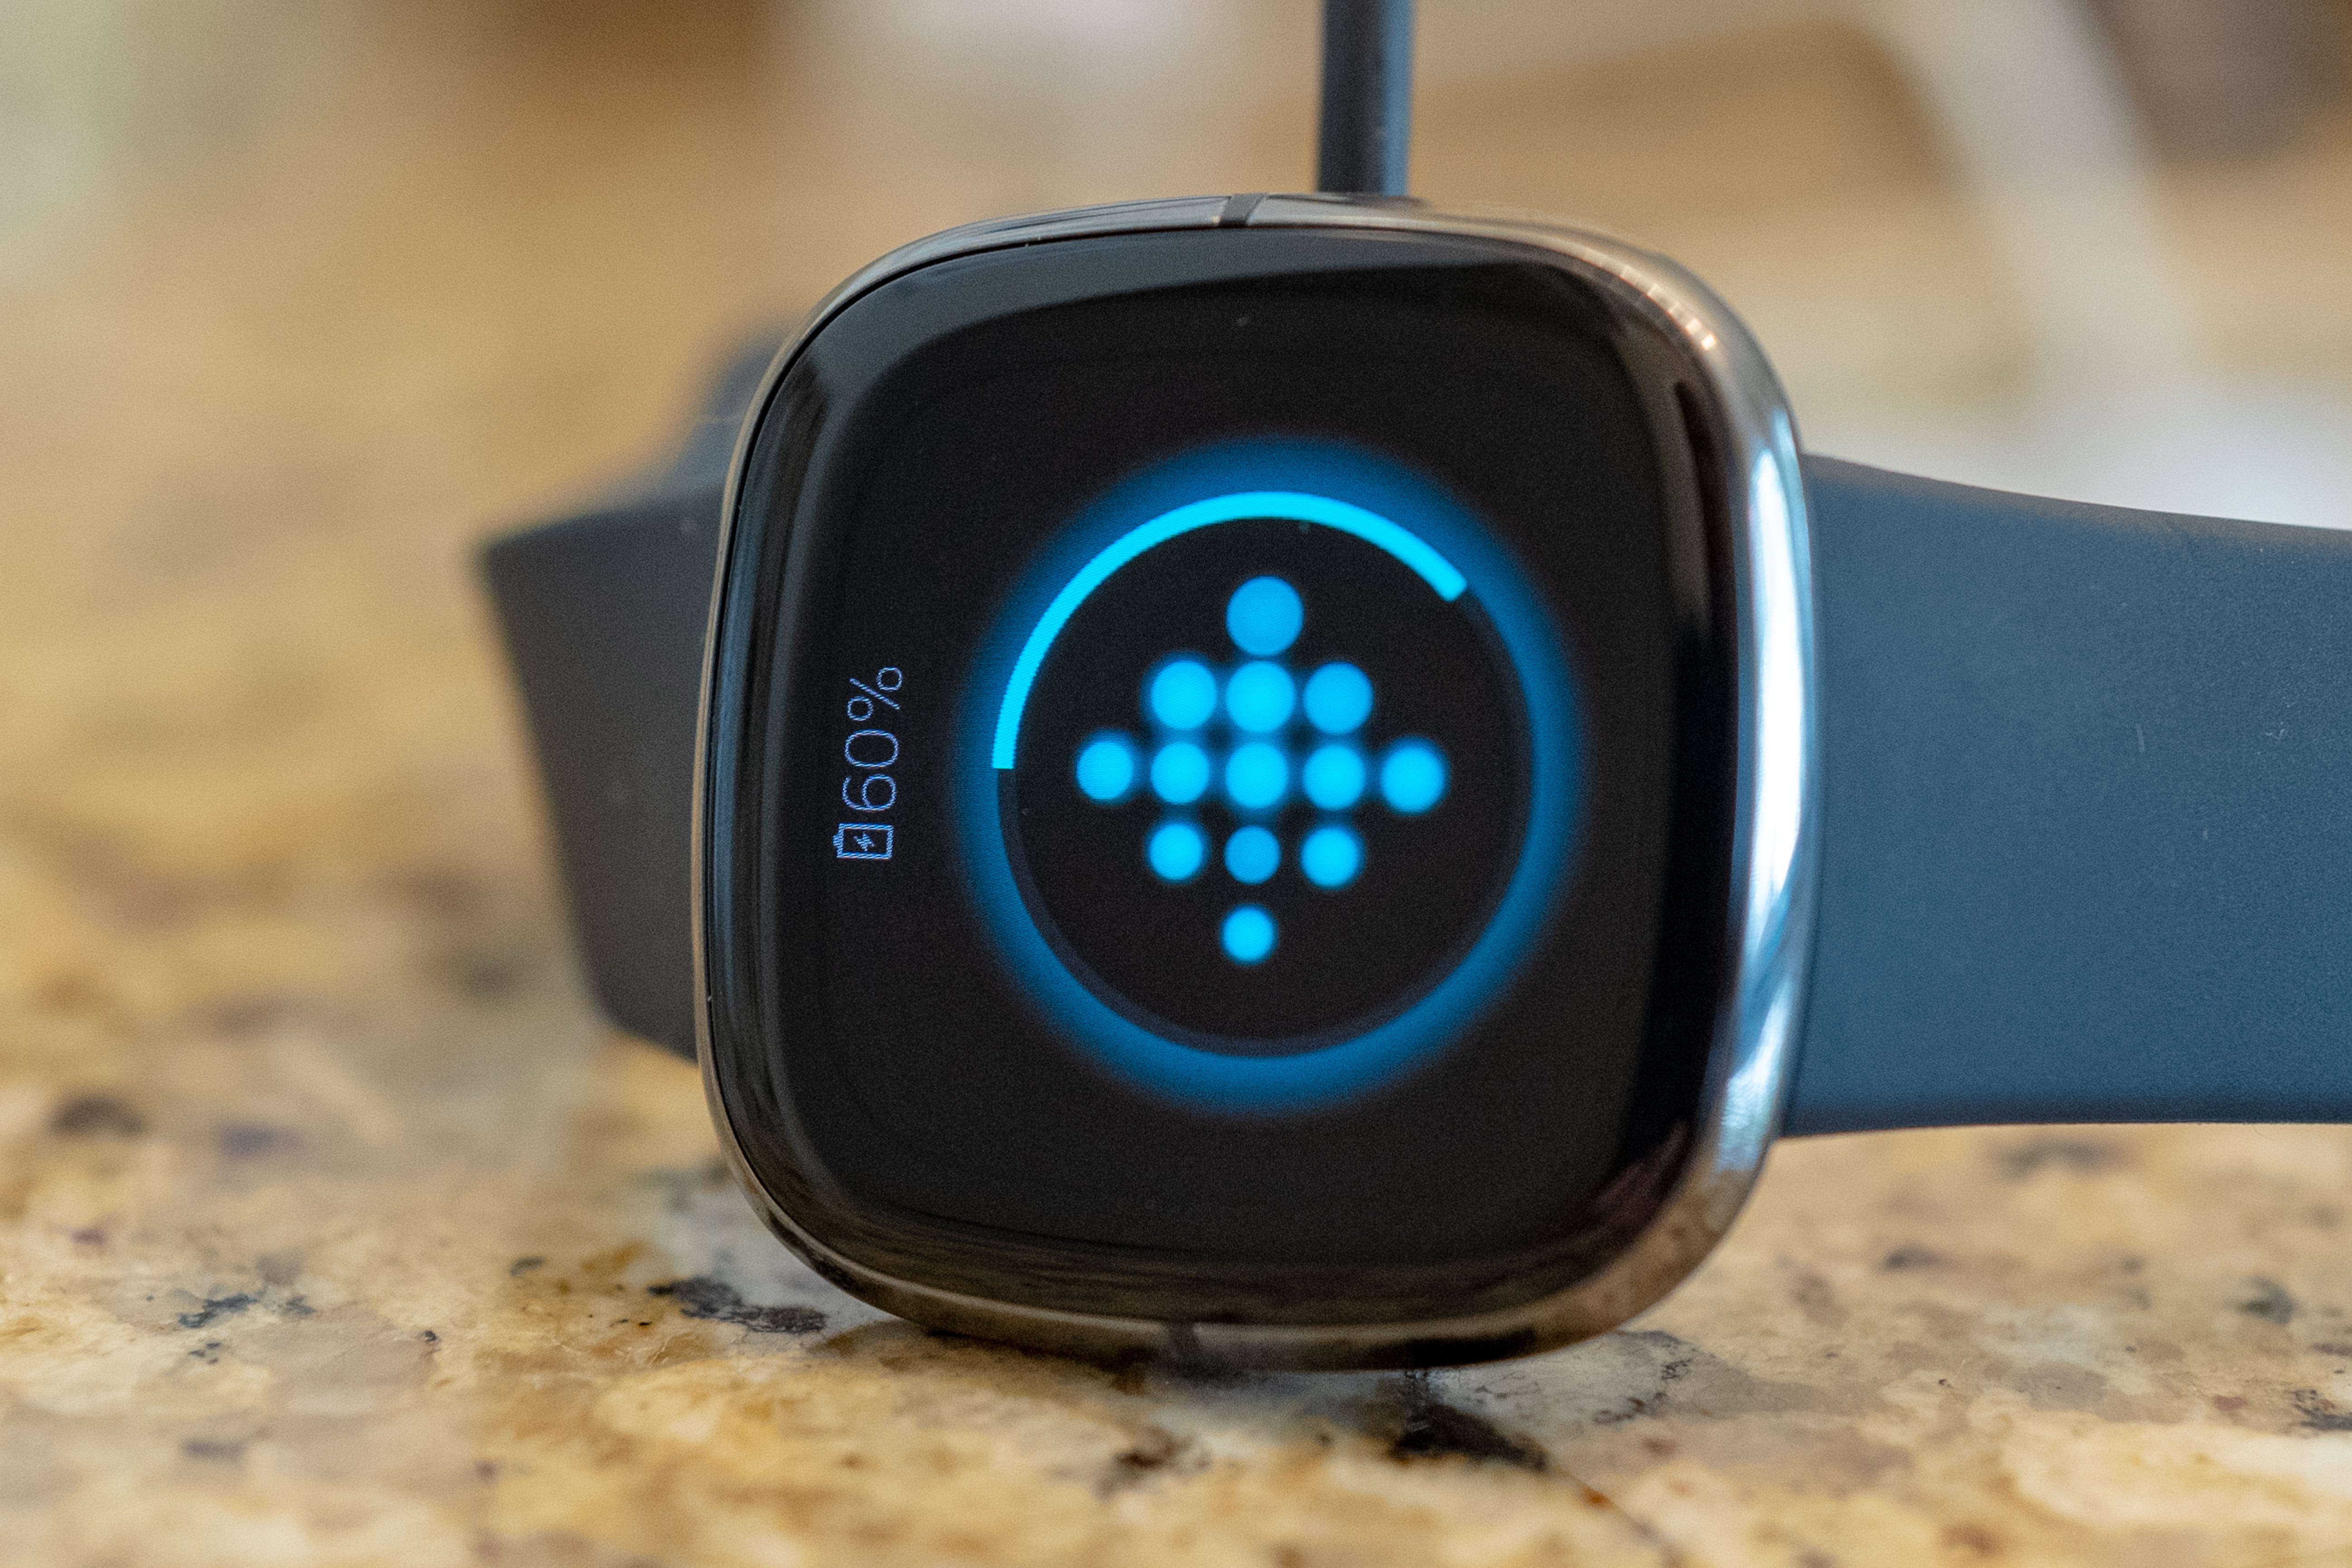 fitbit with apple health